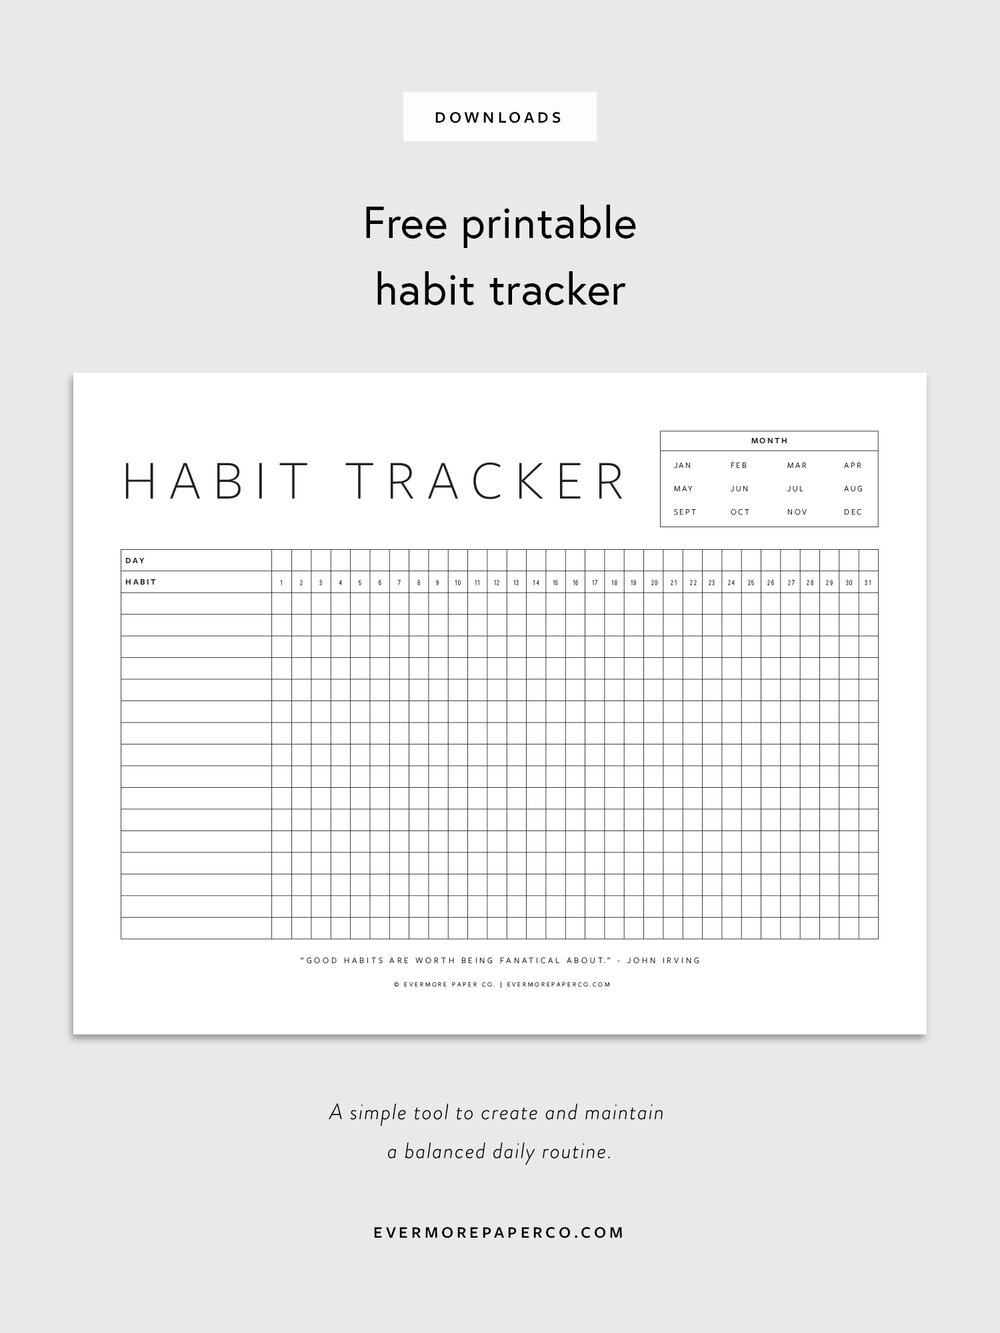 Downloadable Habit Tracker Weekly, Daily Digital Printable HABIT TRACKER Printable Productivity Planner Print At Home Habit Tracker